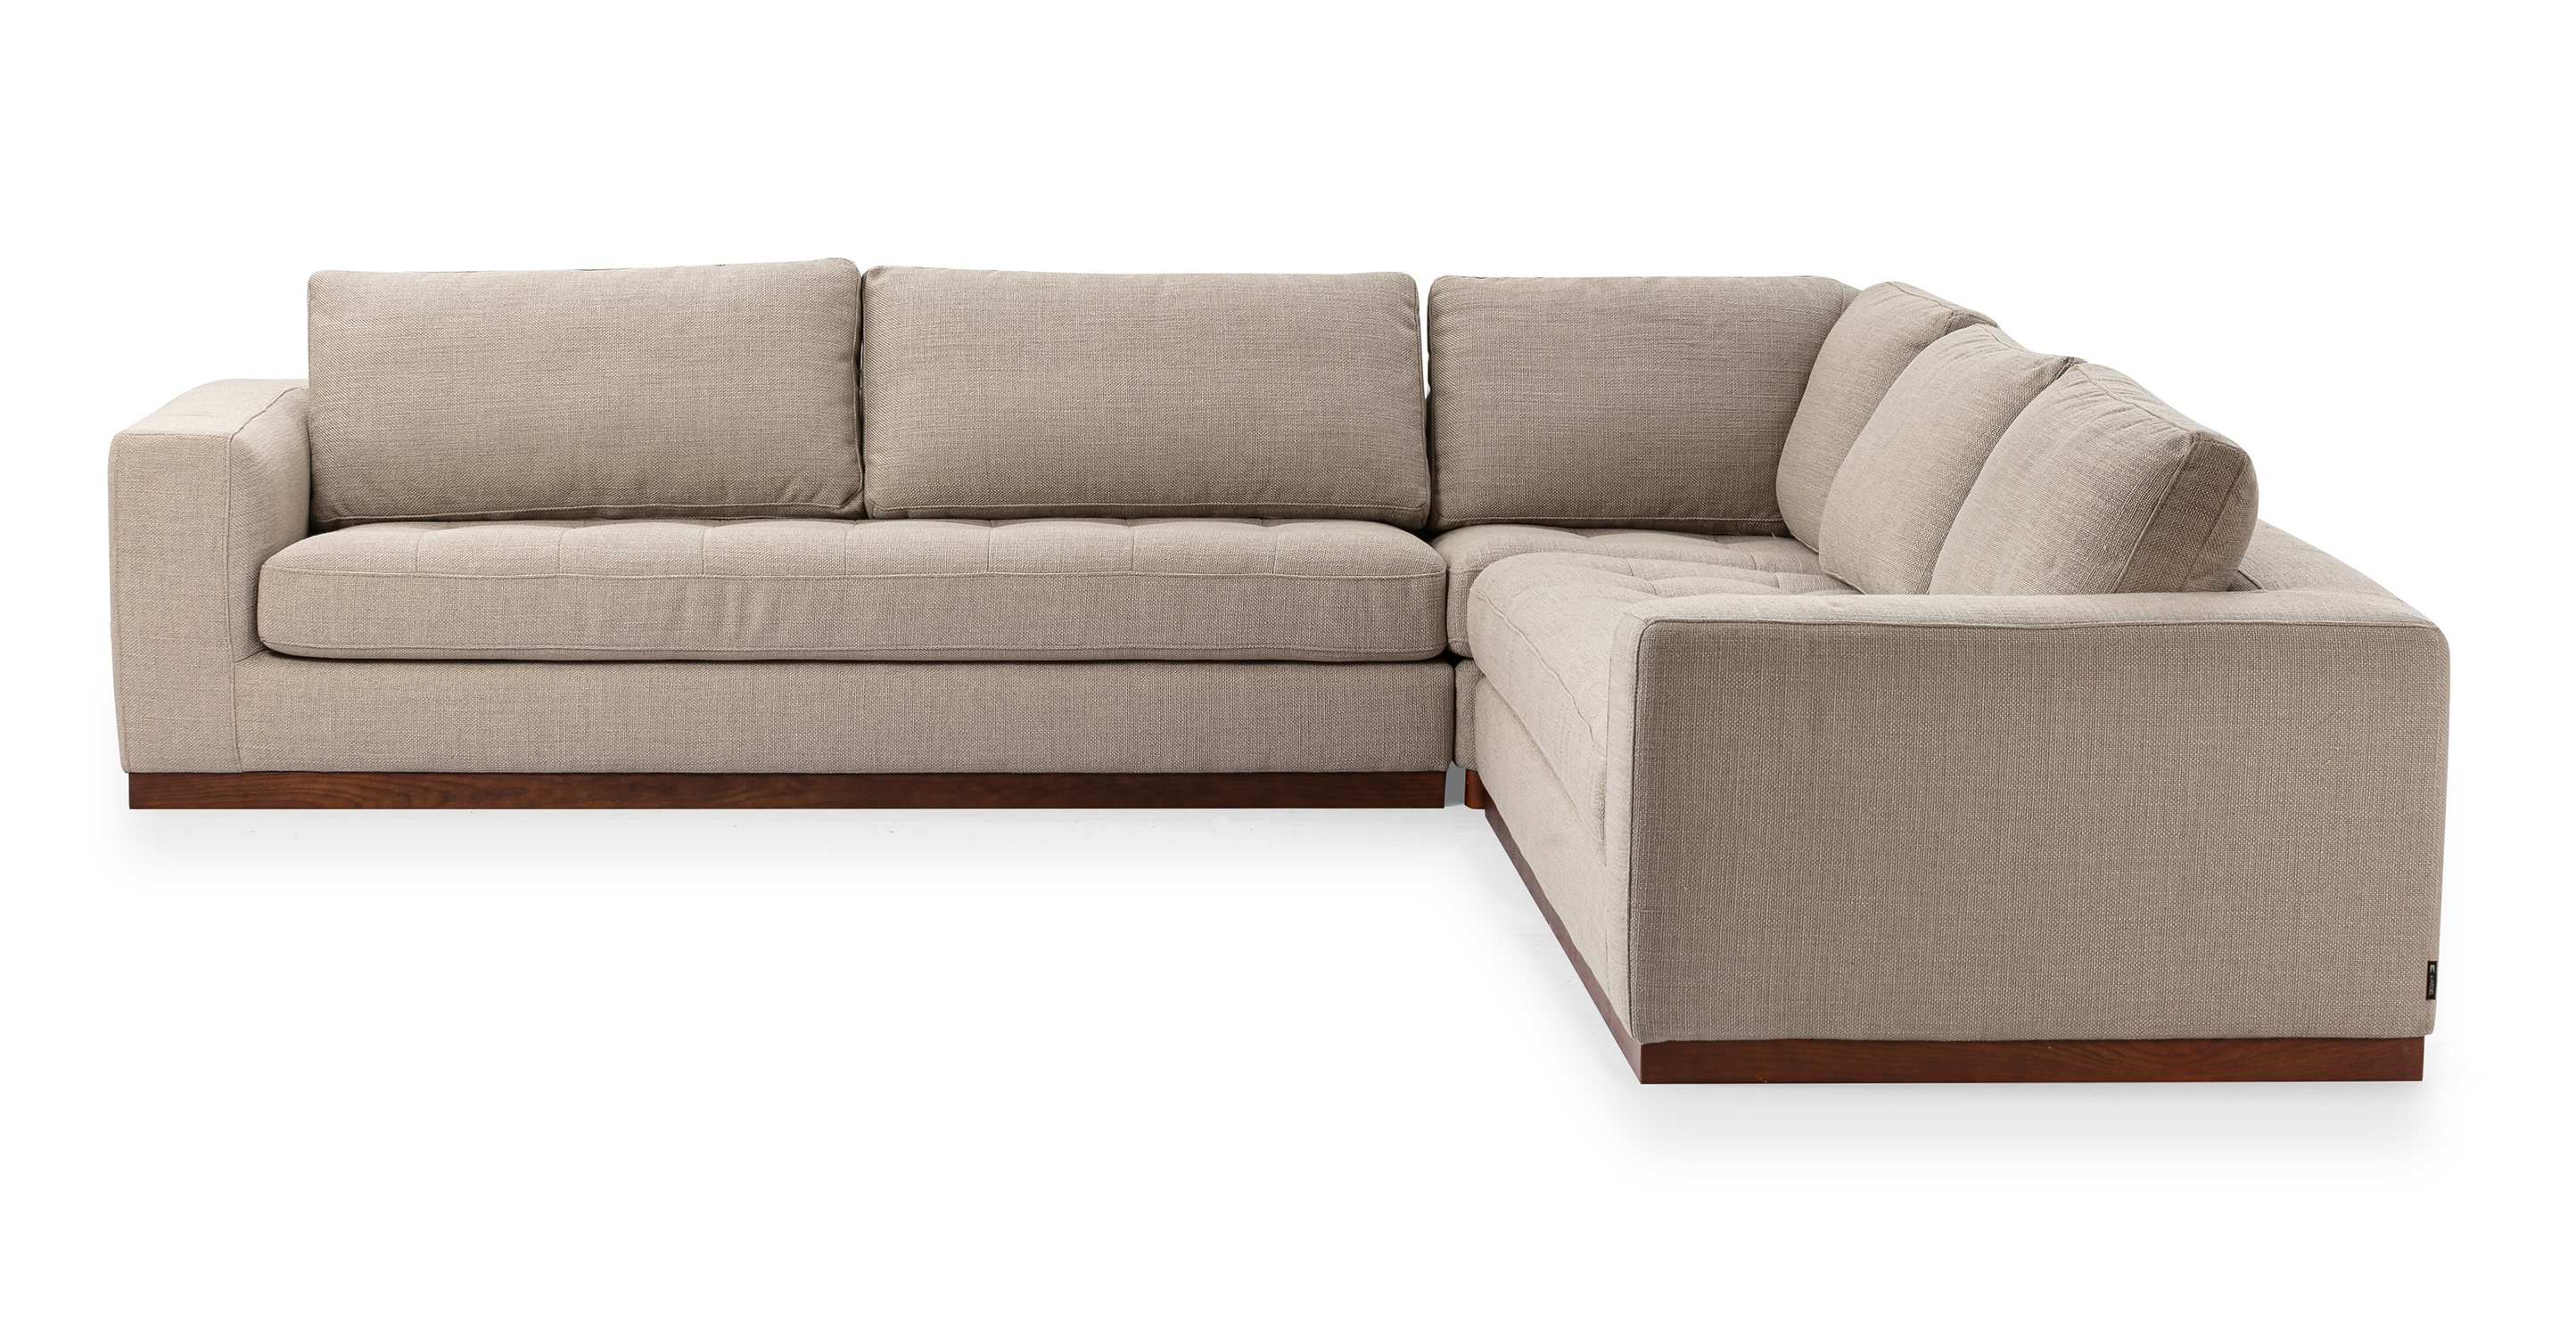 Newport floor sofa series in Dunes color offers a substantial and solid feel. The base of the sofa series is crafted from walnut wood, providing a sturdy and stylish foundation. The modular design allows for flexibility in configuring the components to suit your preferences and space.
Each component of the series features an upholstered base that is attached to the wooden frame, combining both comfort and durability. The seat and back cushions are removable, allowing for easy customization and cleaning.
The arms of the sofa pieces are rectangular, providing a clean and contemporary aesthetic.
In the Newport 5 L sectional, two single arm sofas connect to a corner piece to create an L sectional shape.
